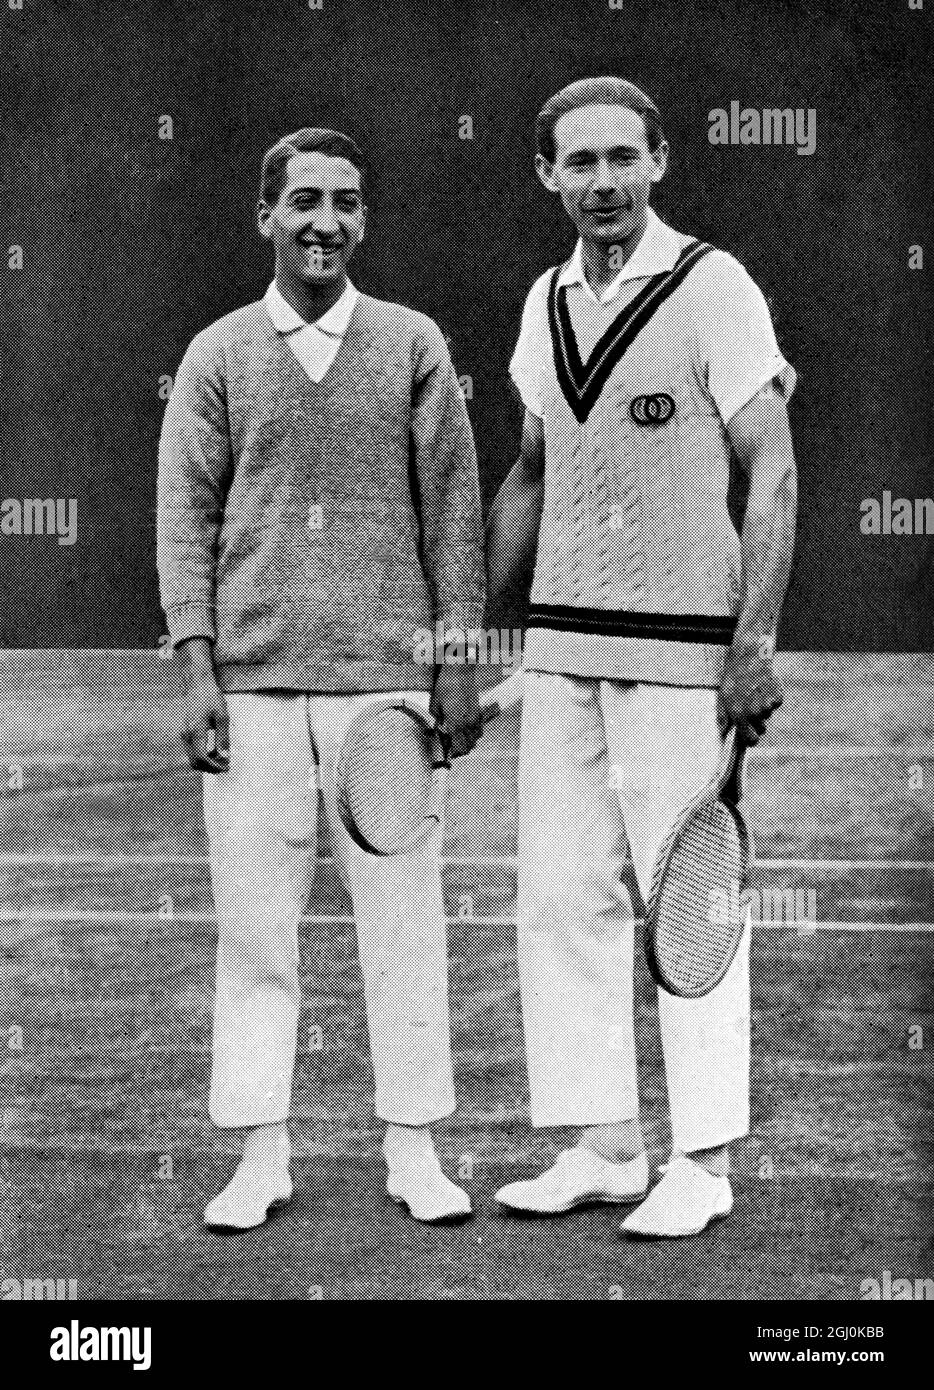 R. Lacoste and J. Borotra 1924 - all-French finalists. Jean René Lacoste  (July 2, 1904 - October 12, 1996) was a famous French tennis player and  businessman, nicknamed 